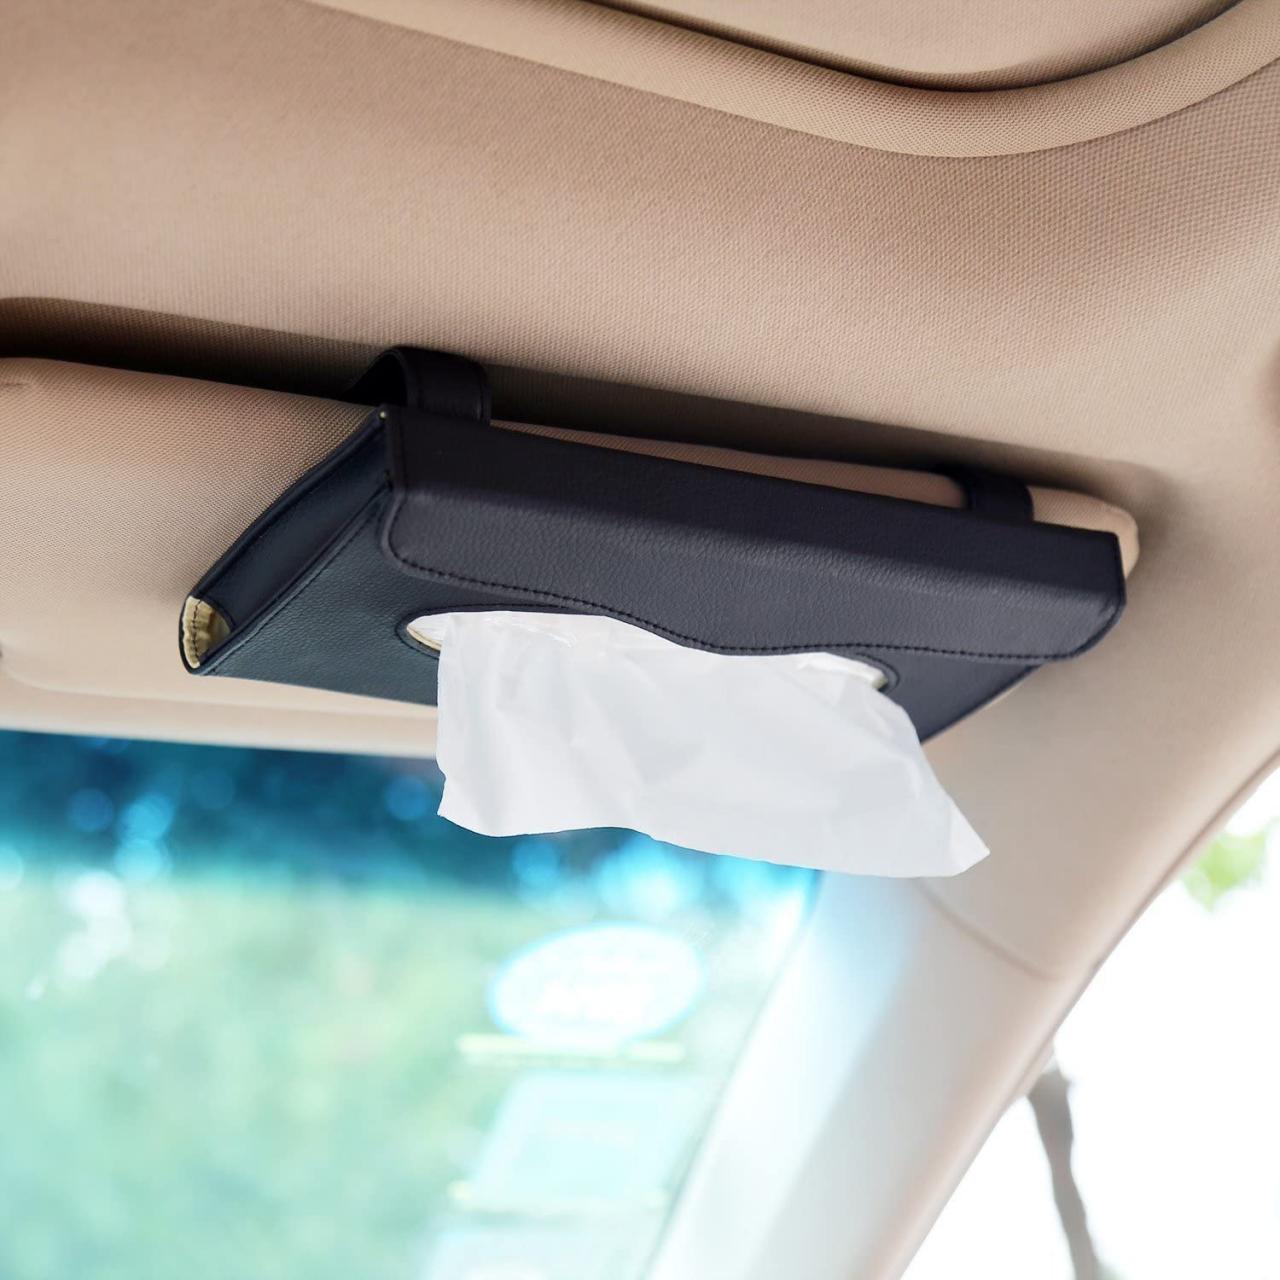 The Best Car Tissue Holders (Review) in 2020 | Car Bibles